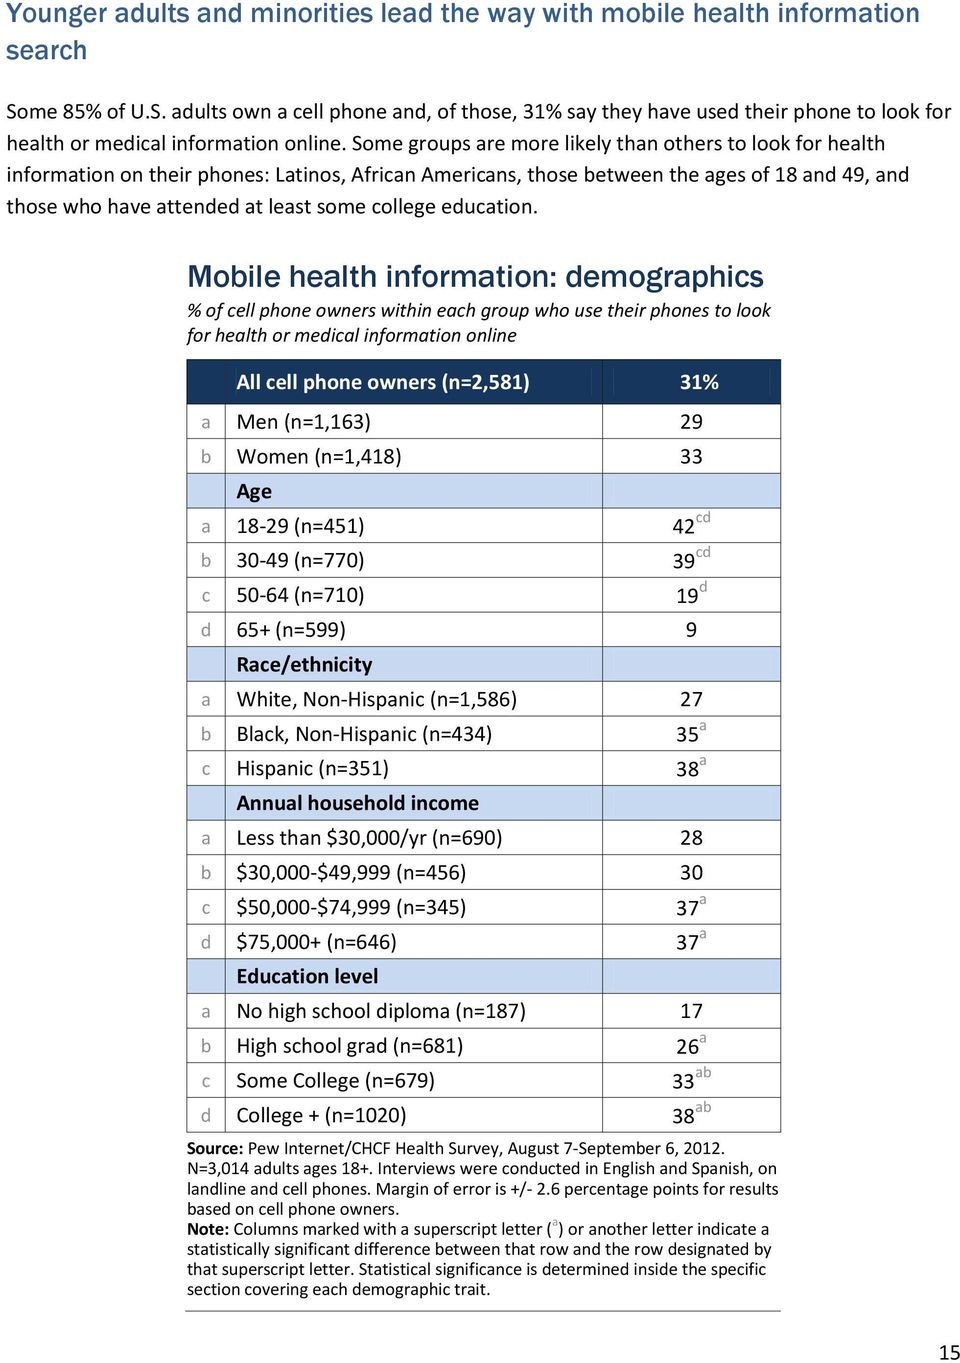 Some groups are more likely than others to look for health information on their phones: Latinos, African Americans, those between the ages of 18 and 49, and those who have attended at least some